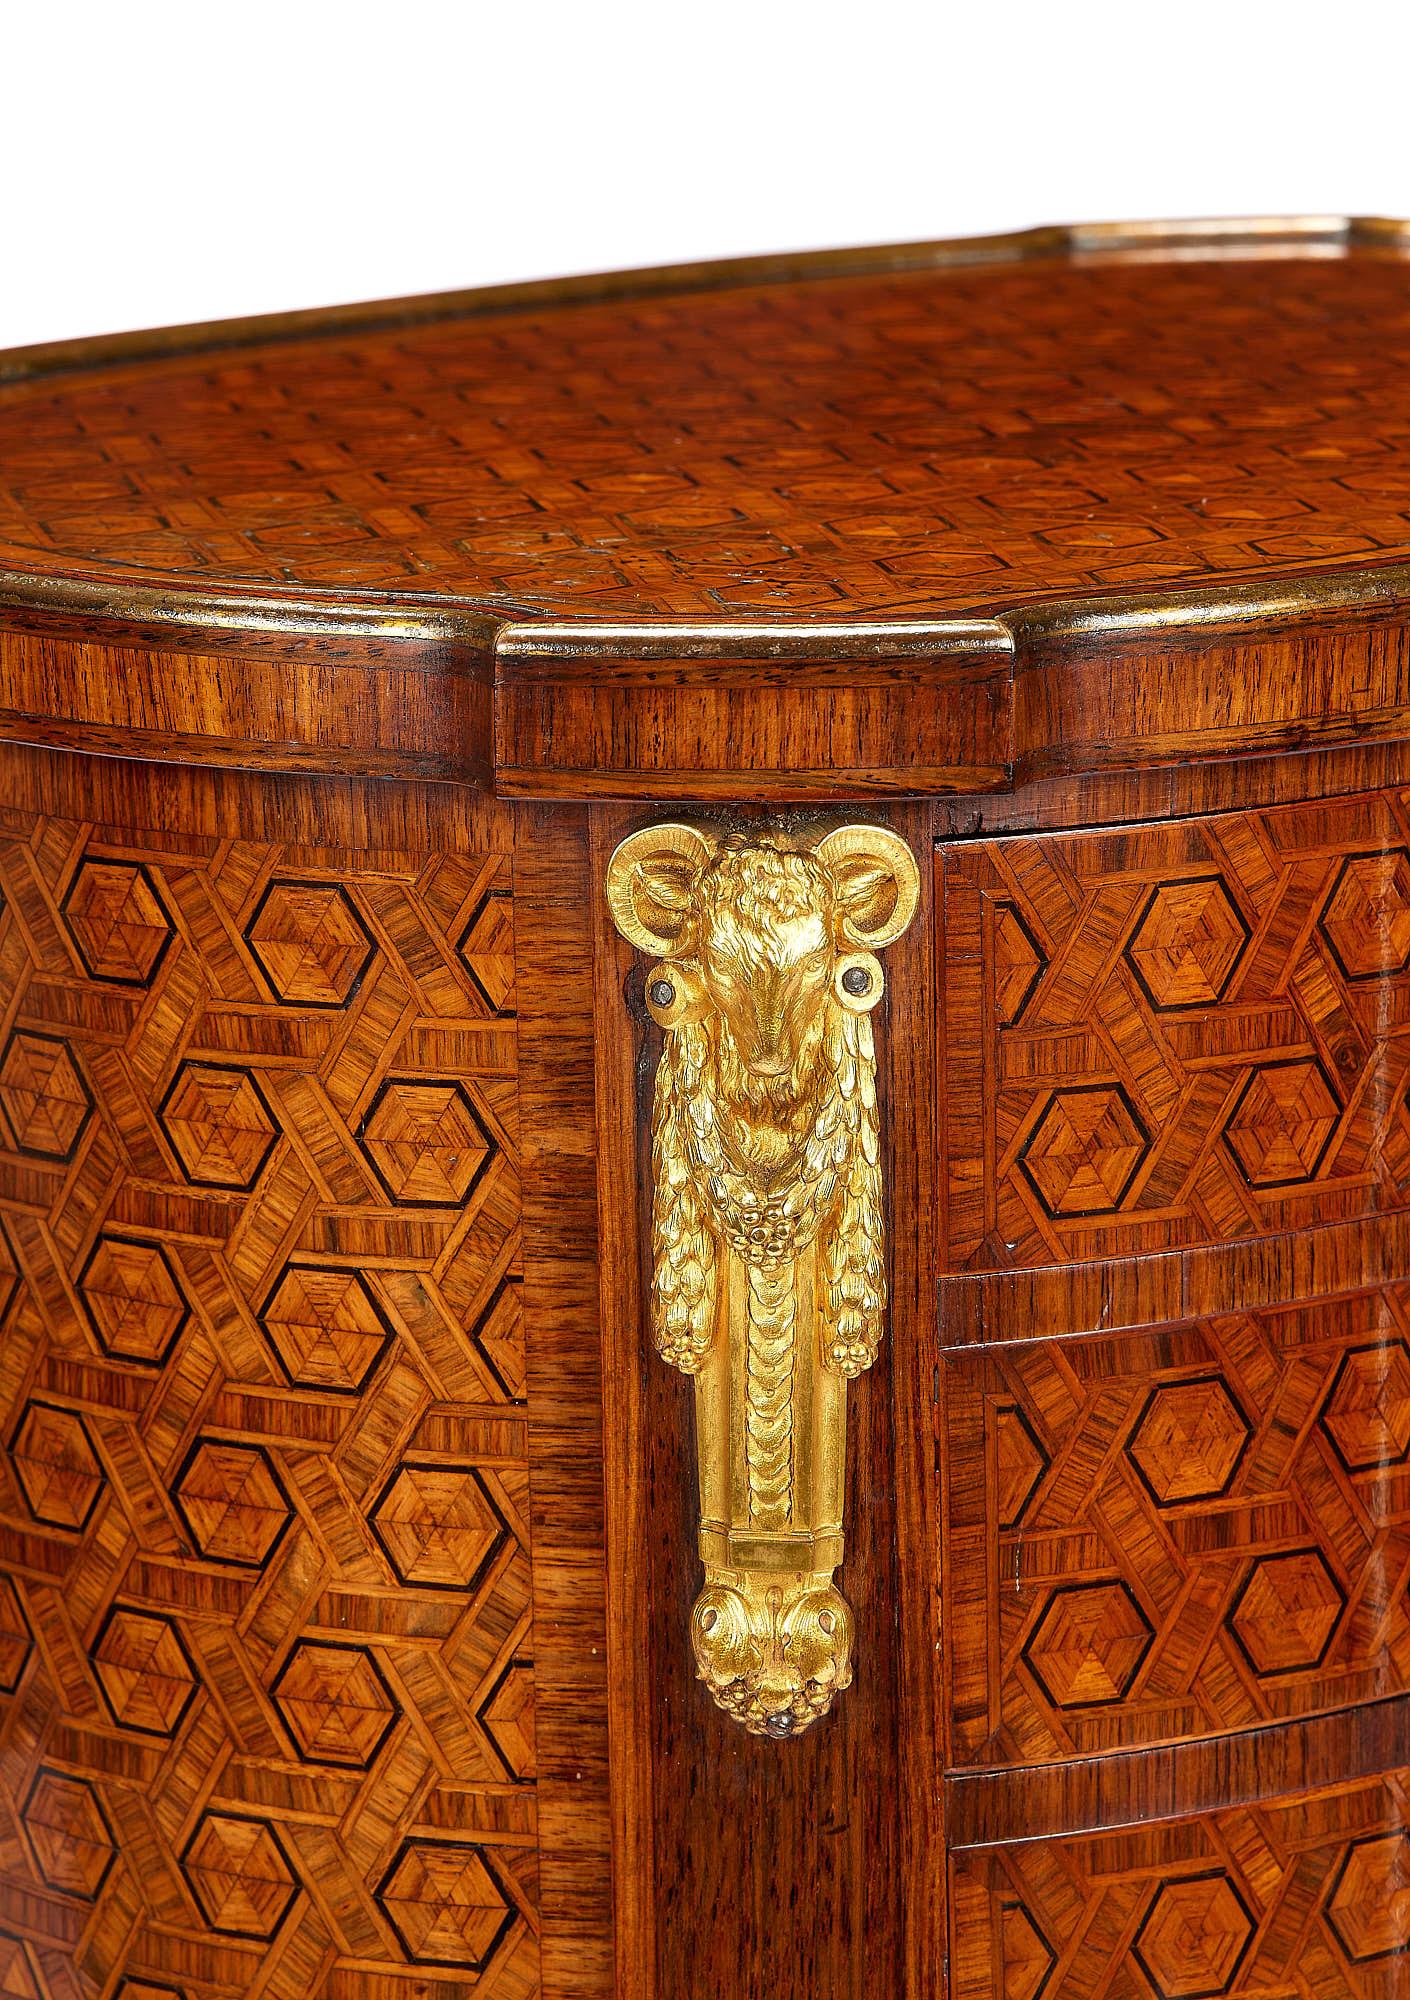 A fine late 19th century tulipwood and kingwood side table or table en chiffoniere inlaid with stained sycamore lines applied with gilt bronze mounts and an edging. The shaped oval top with projecting corners is above three drawers with gilt bronze